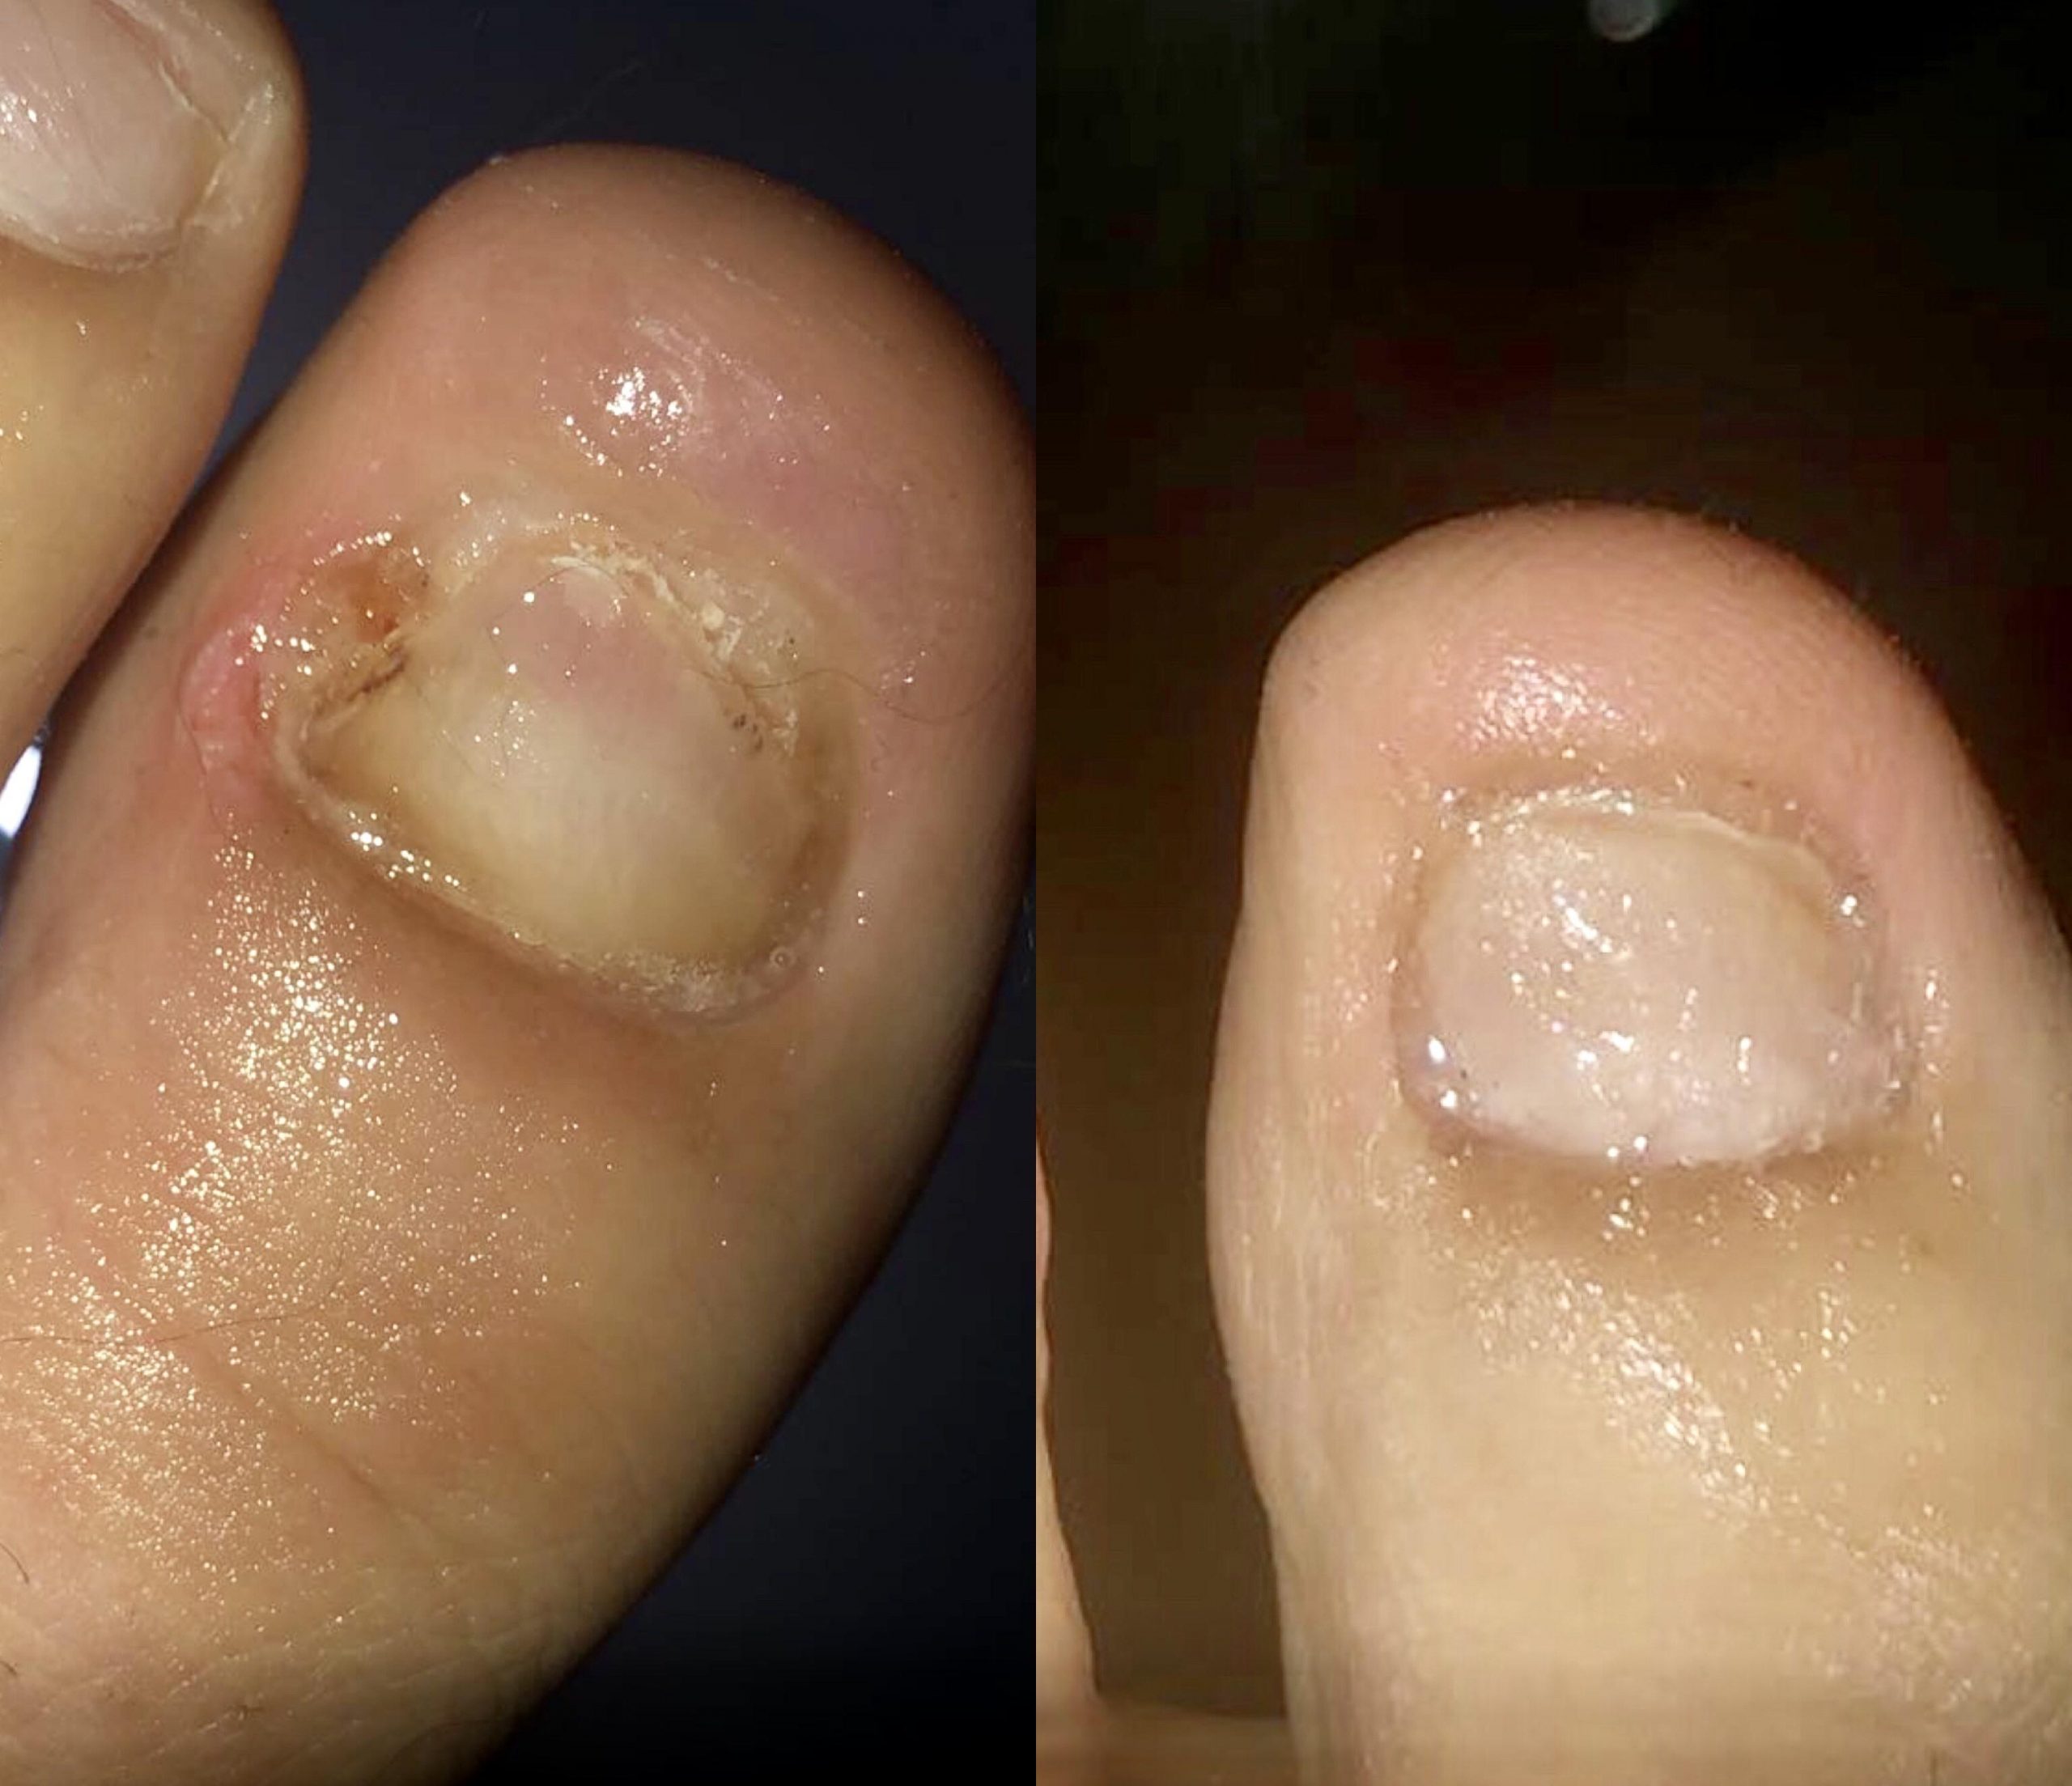 Hydrogen Peroxide Toenail Fungus Before And After